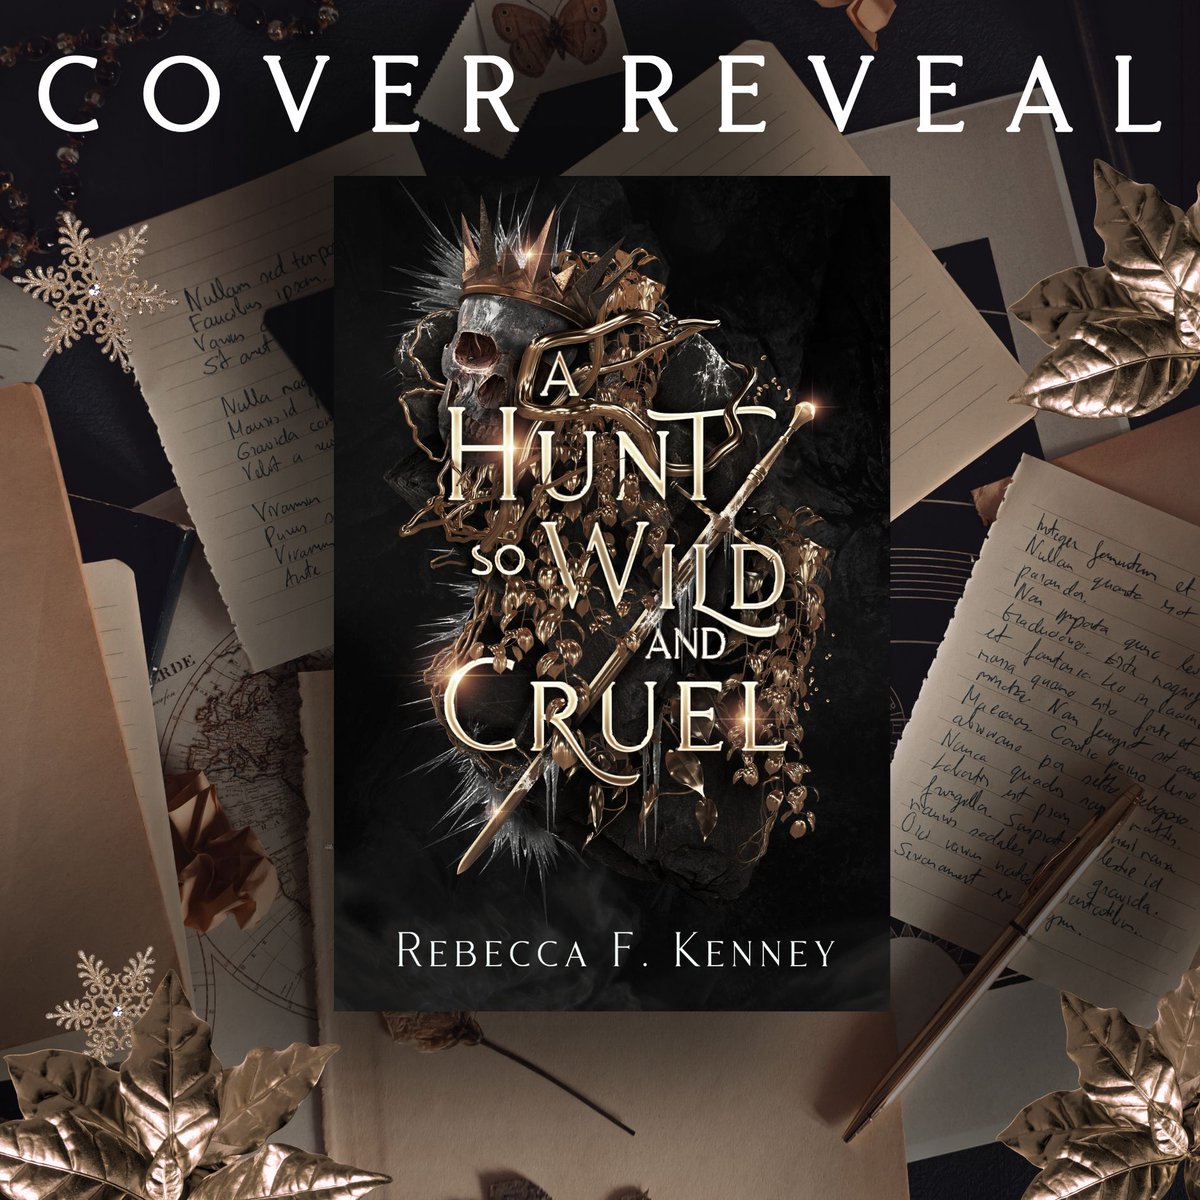 Cover reveal for my new why-choose/polyam fantasy romance, 'A Hunt So Wild and Cruel,' a spicy Fae retelling of 'A Christmas Carol' with 3 hunky Fae ghost riders and one smol vicious queen. mybook.to/huntsowild